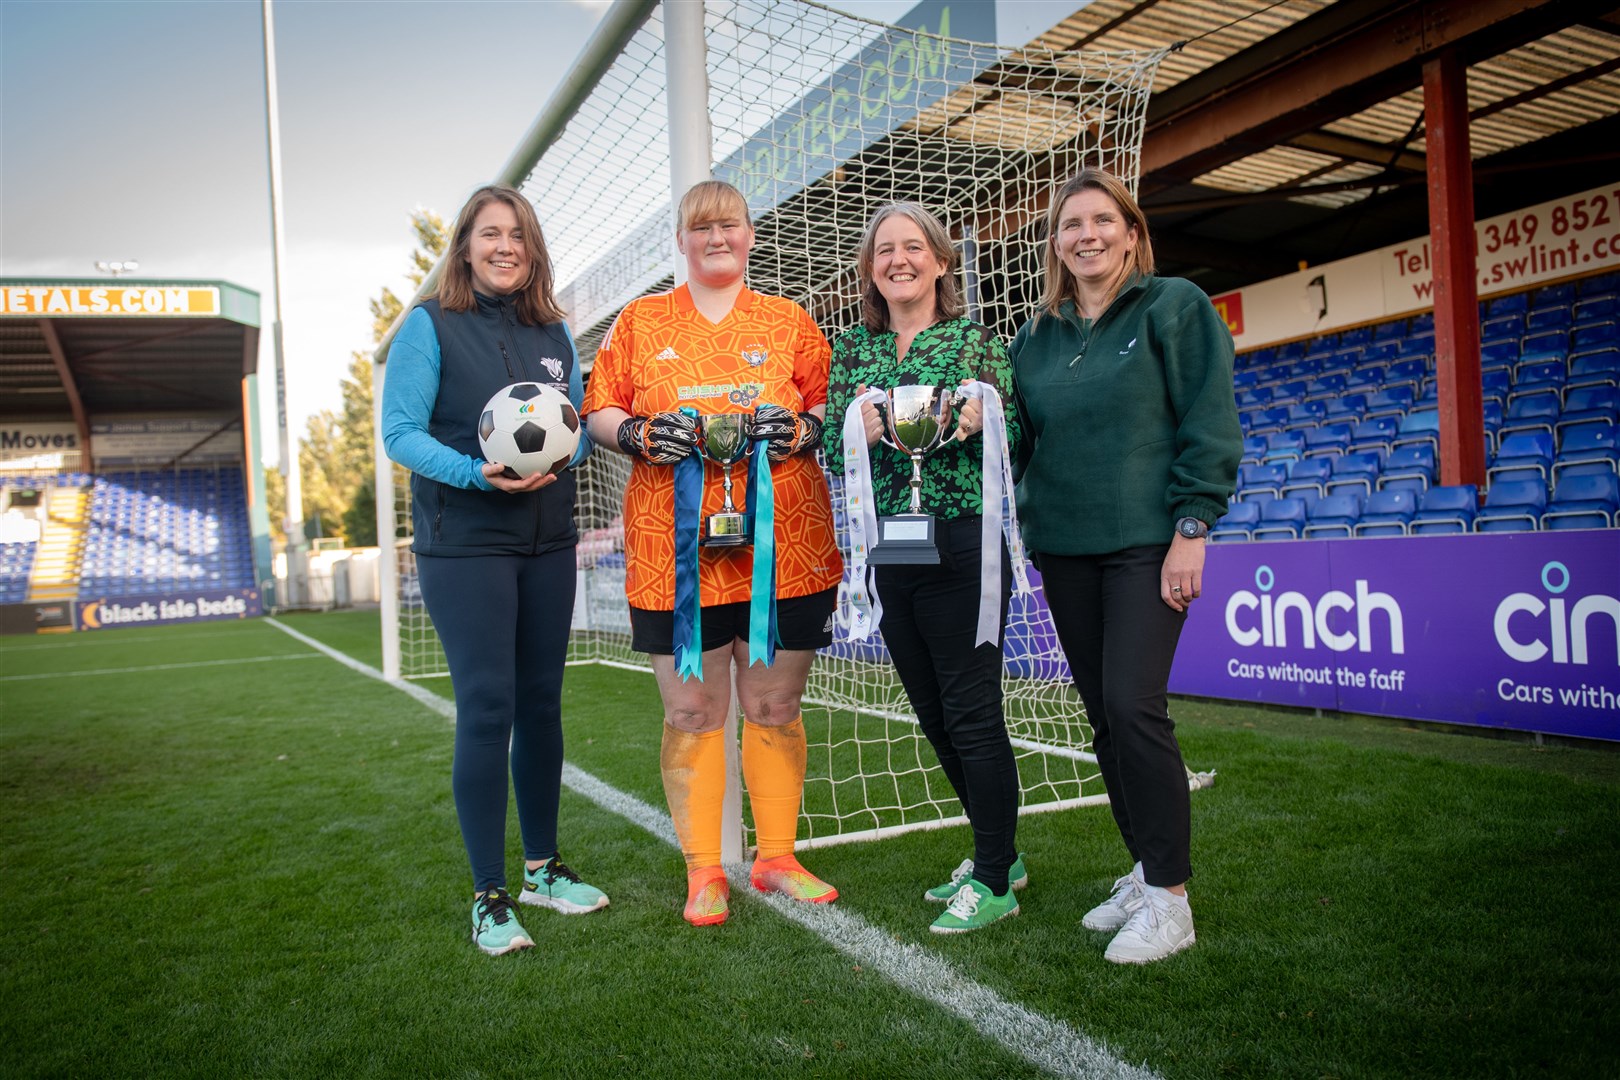 SWF CEO Aileen Campbell, double-winning Buckie goalkeeper Sophia Golebiewski, sports minister Maree Todd and title sponsors ScottishPower's director of engagement Hazel Gulliver visited Ross County's stadium for Scottish Women and Girls in Sport Week. Picture: Callum Mackay